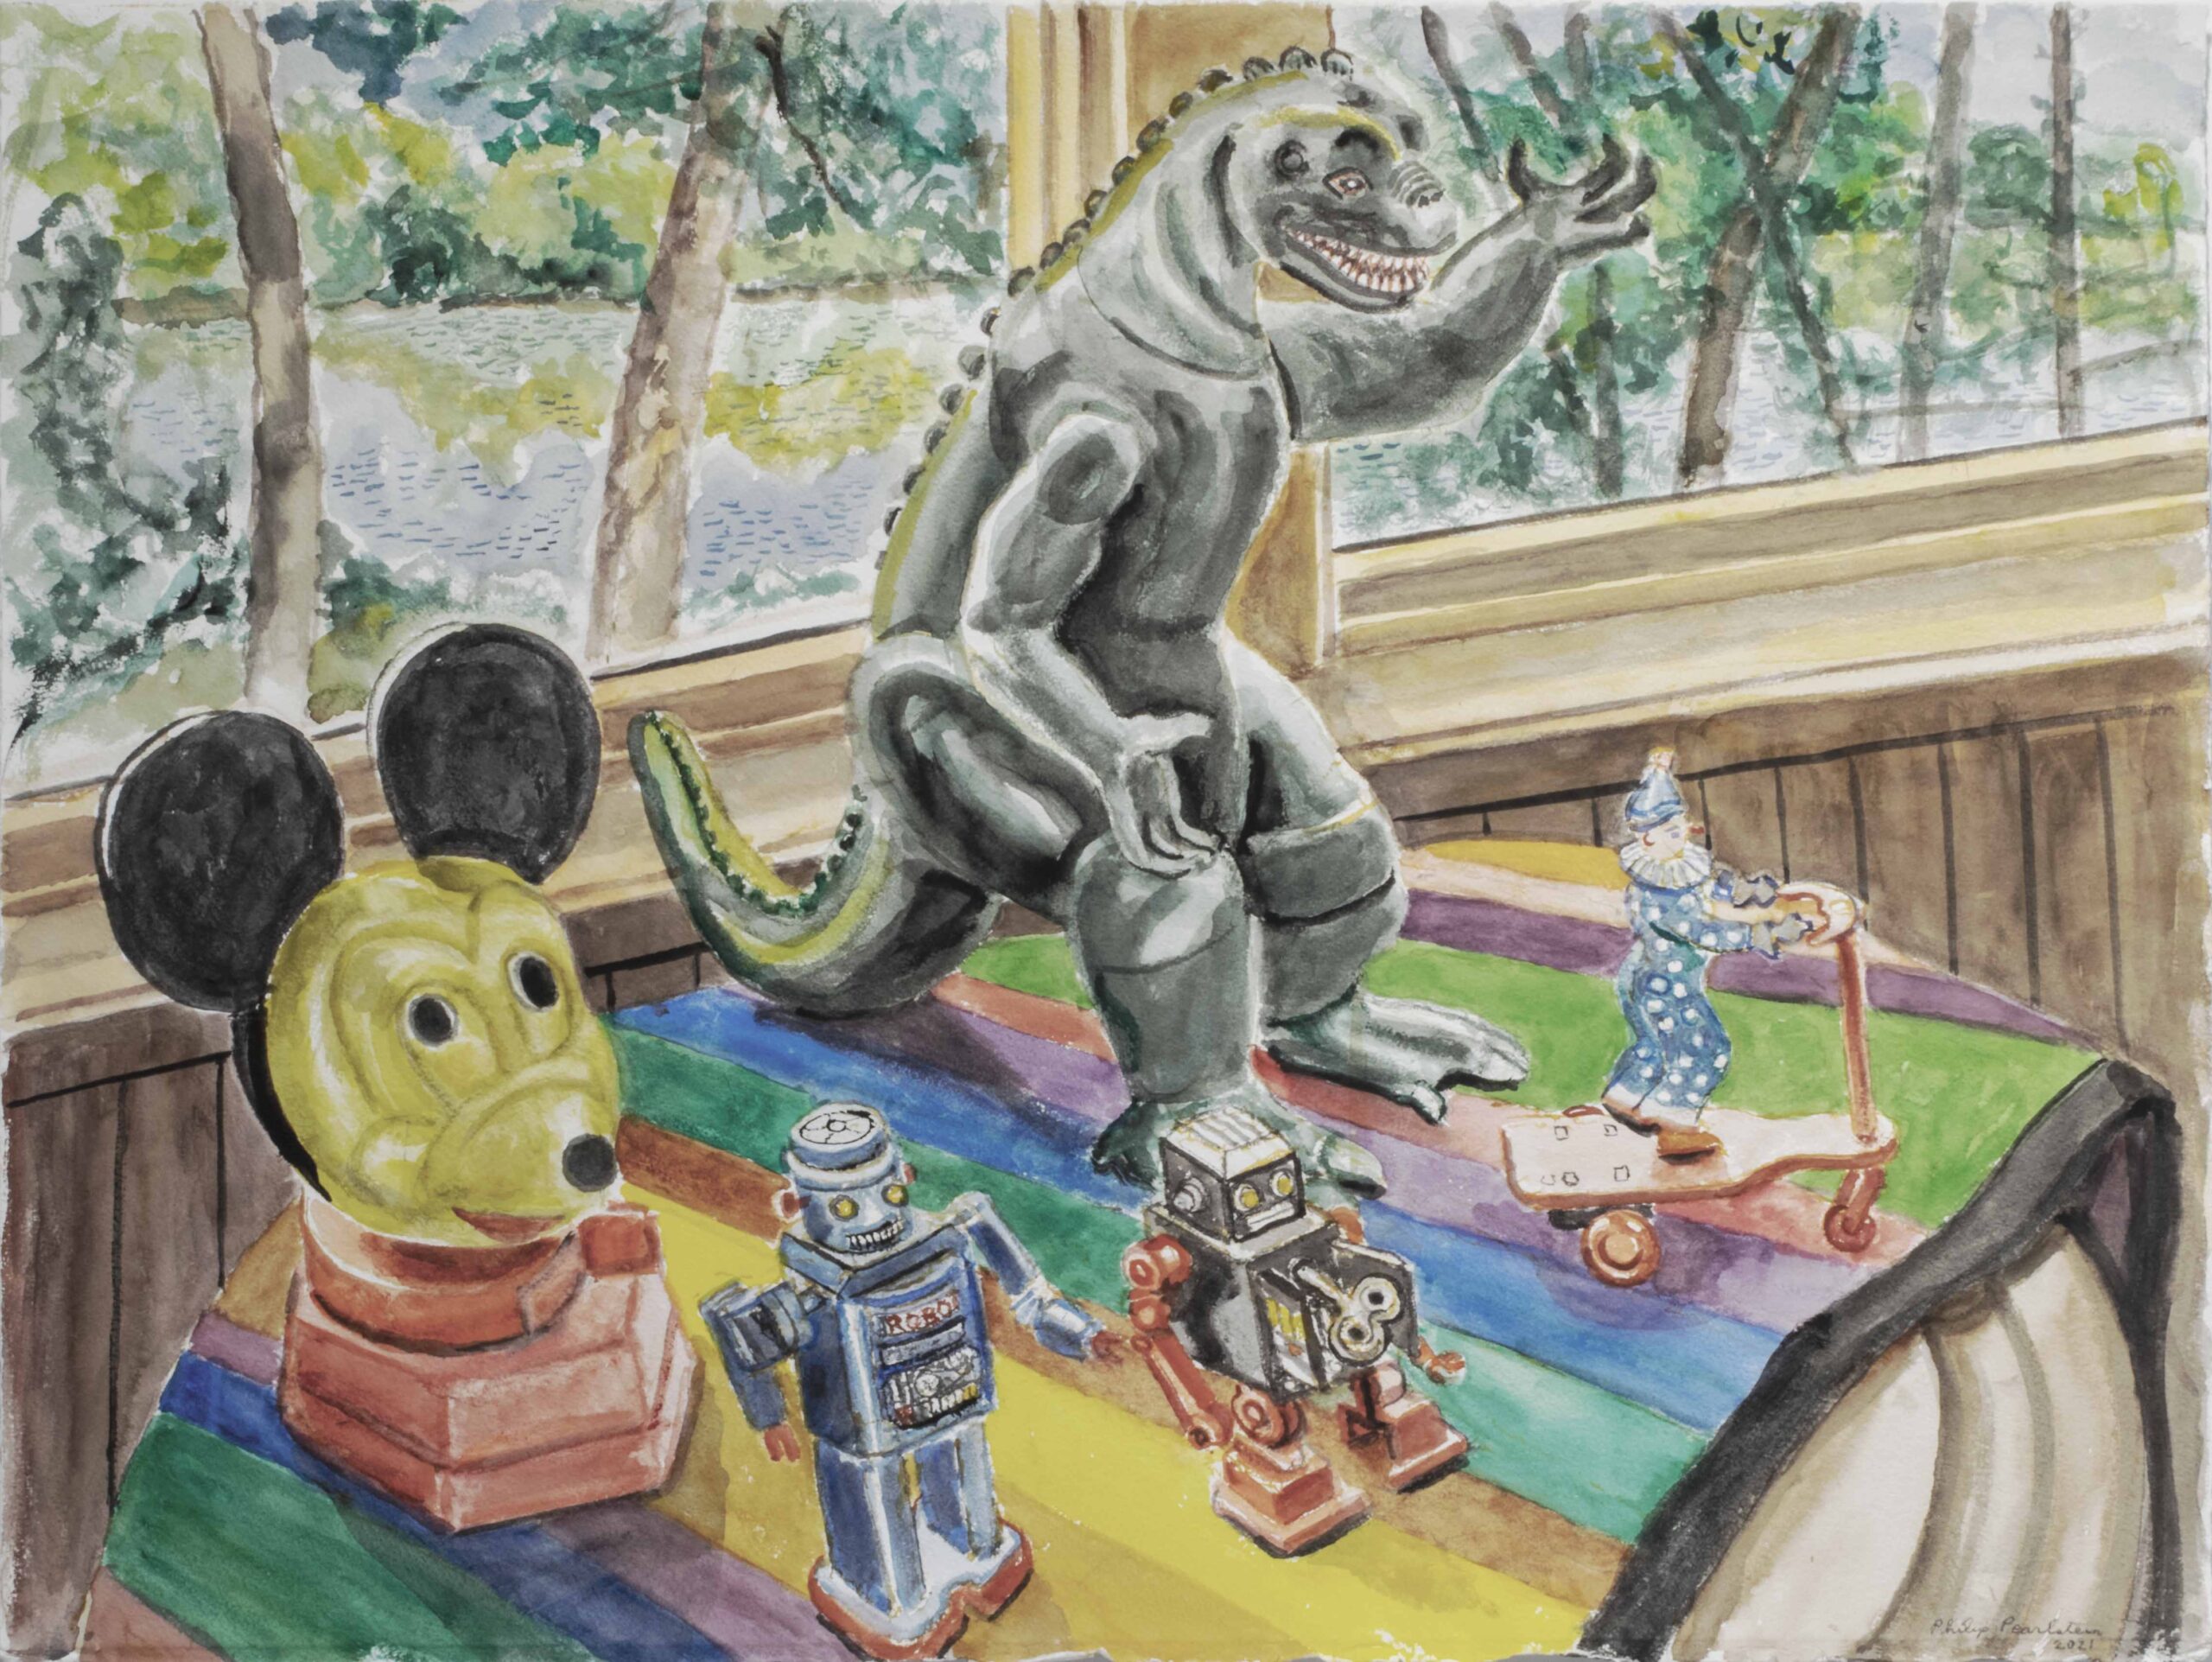 2021 Mickey Mouse Candy Dispenser and Godzilla Watercolor on Paper 22 x 30 PP17047